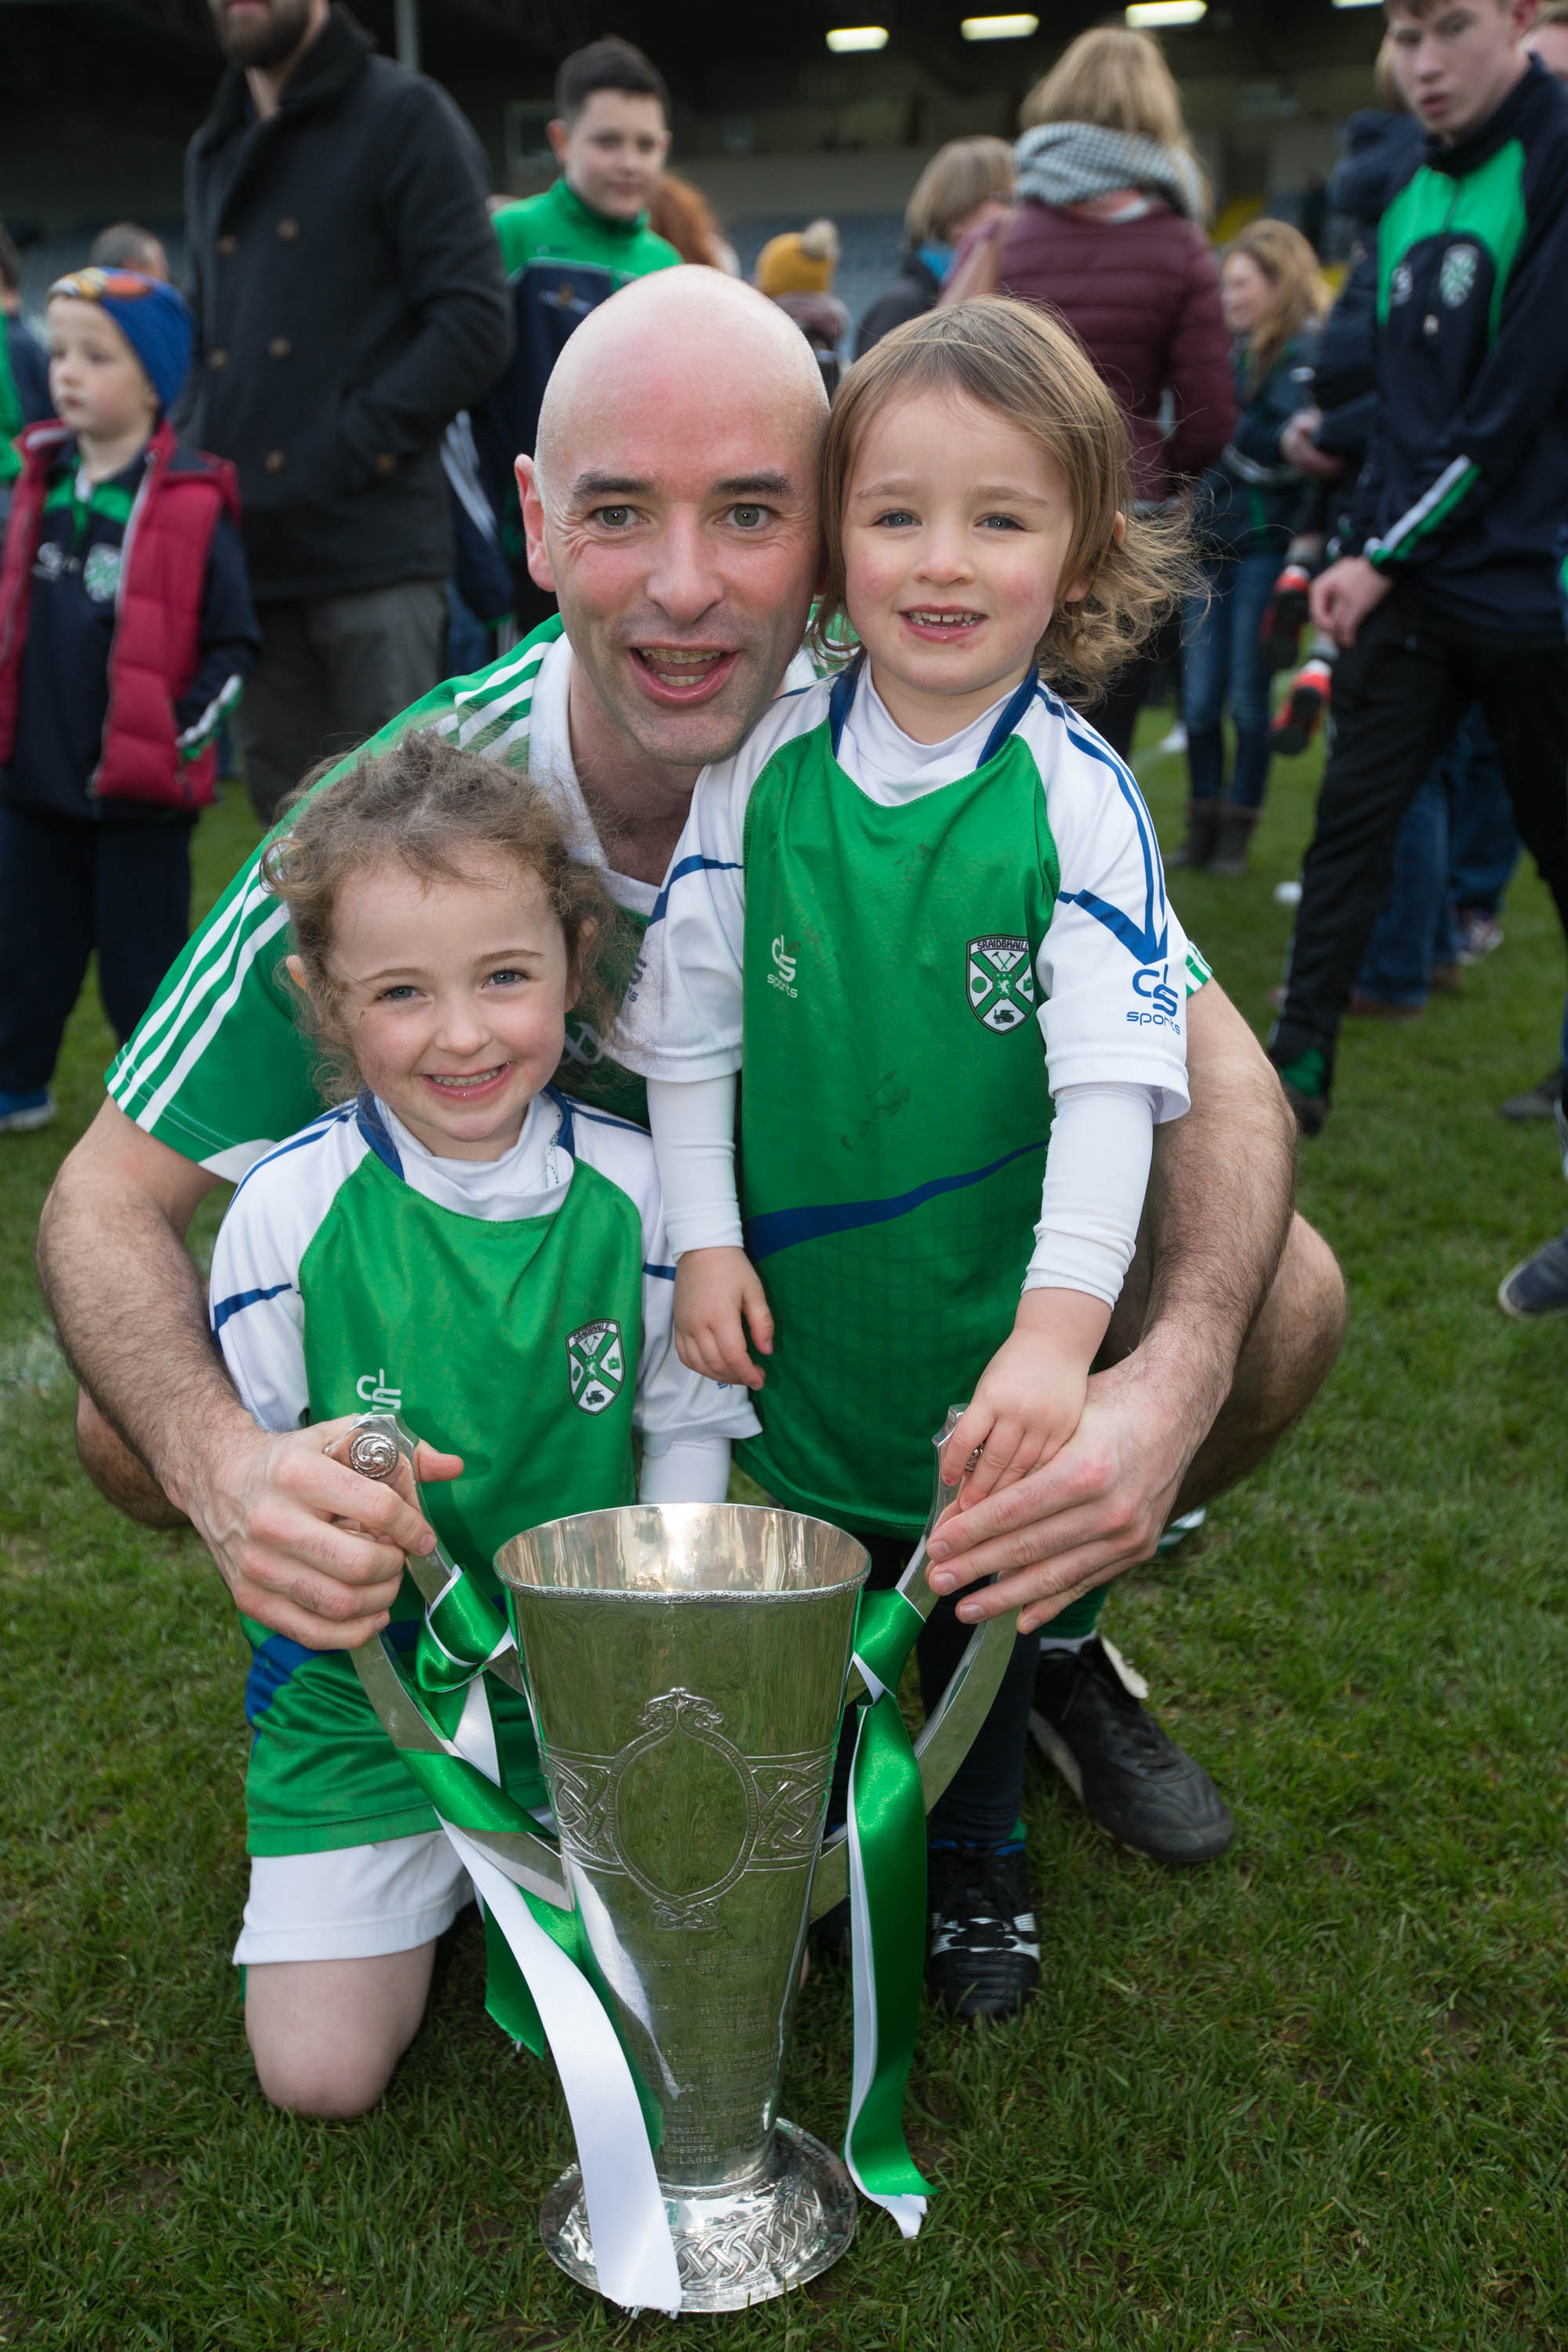 Greg Ramsbottom from Stradbally with his daughters Edel and Emer after the 2016 Laois SFC final